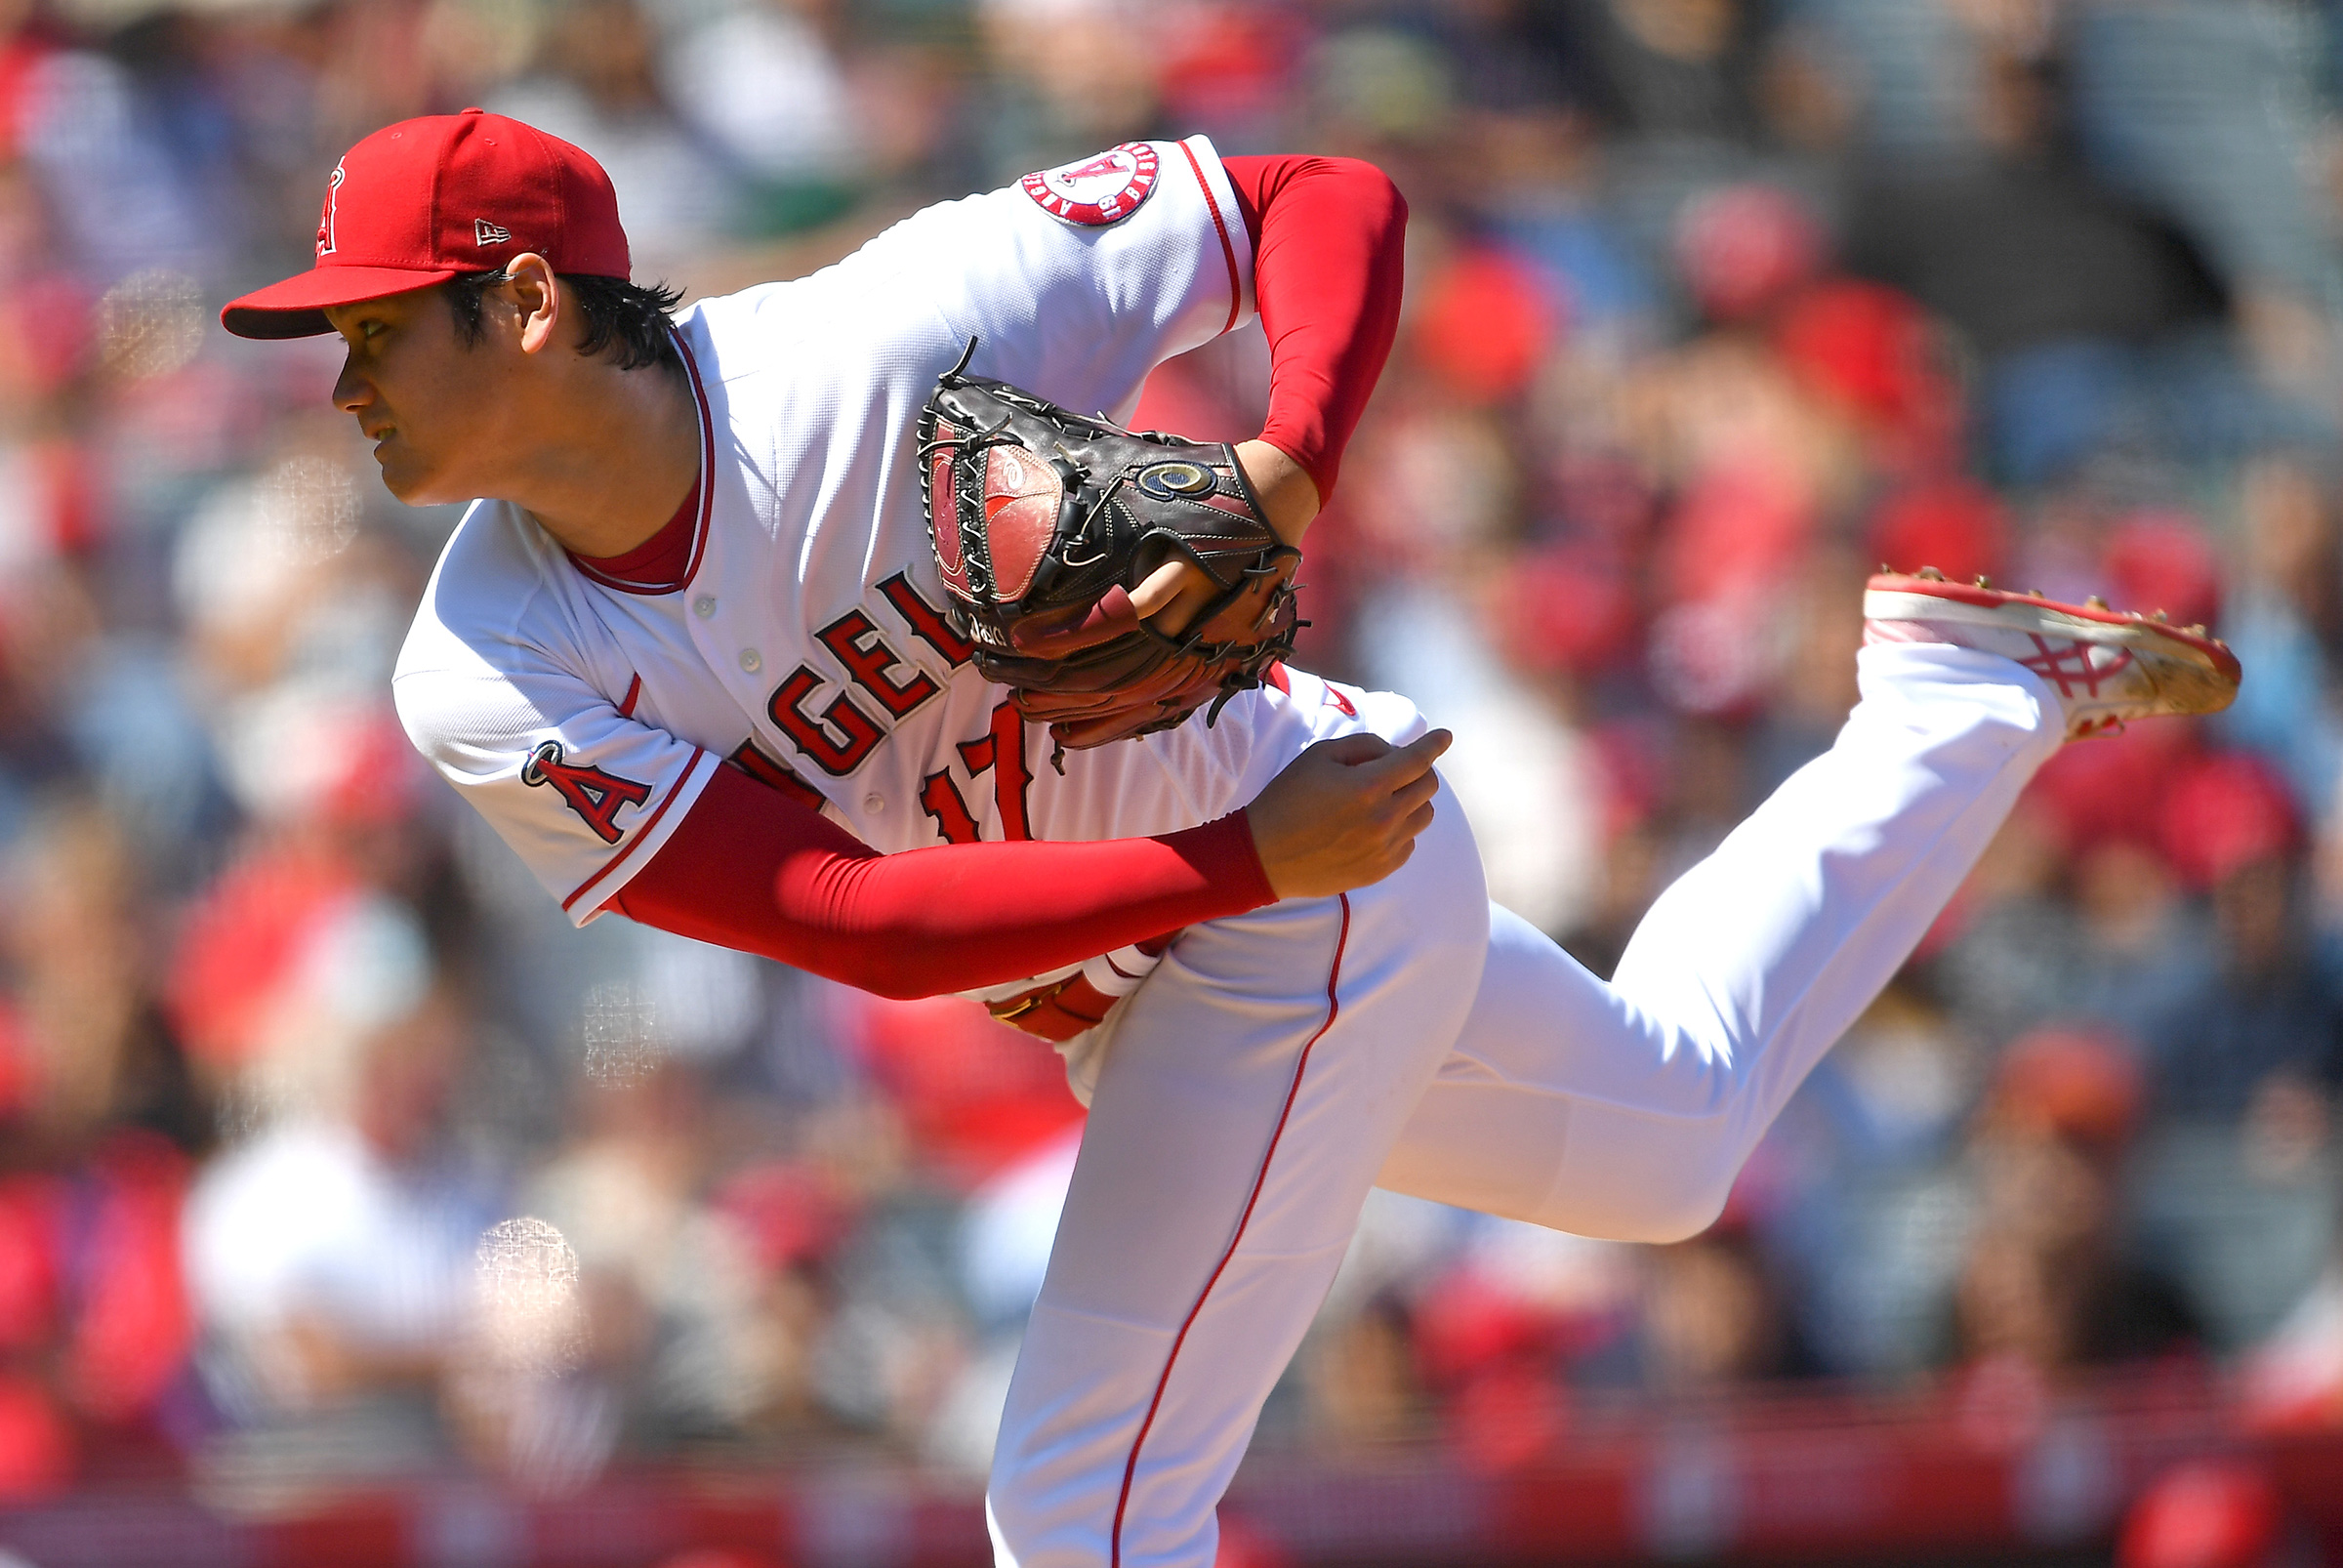 Shohei Ohtani: the two-way Japanese marvel with once-in-a-century talent, MLB